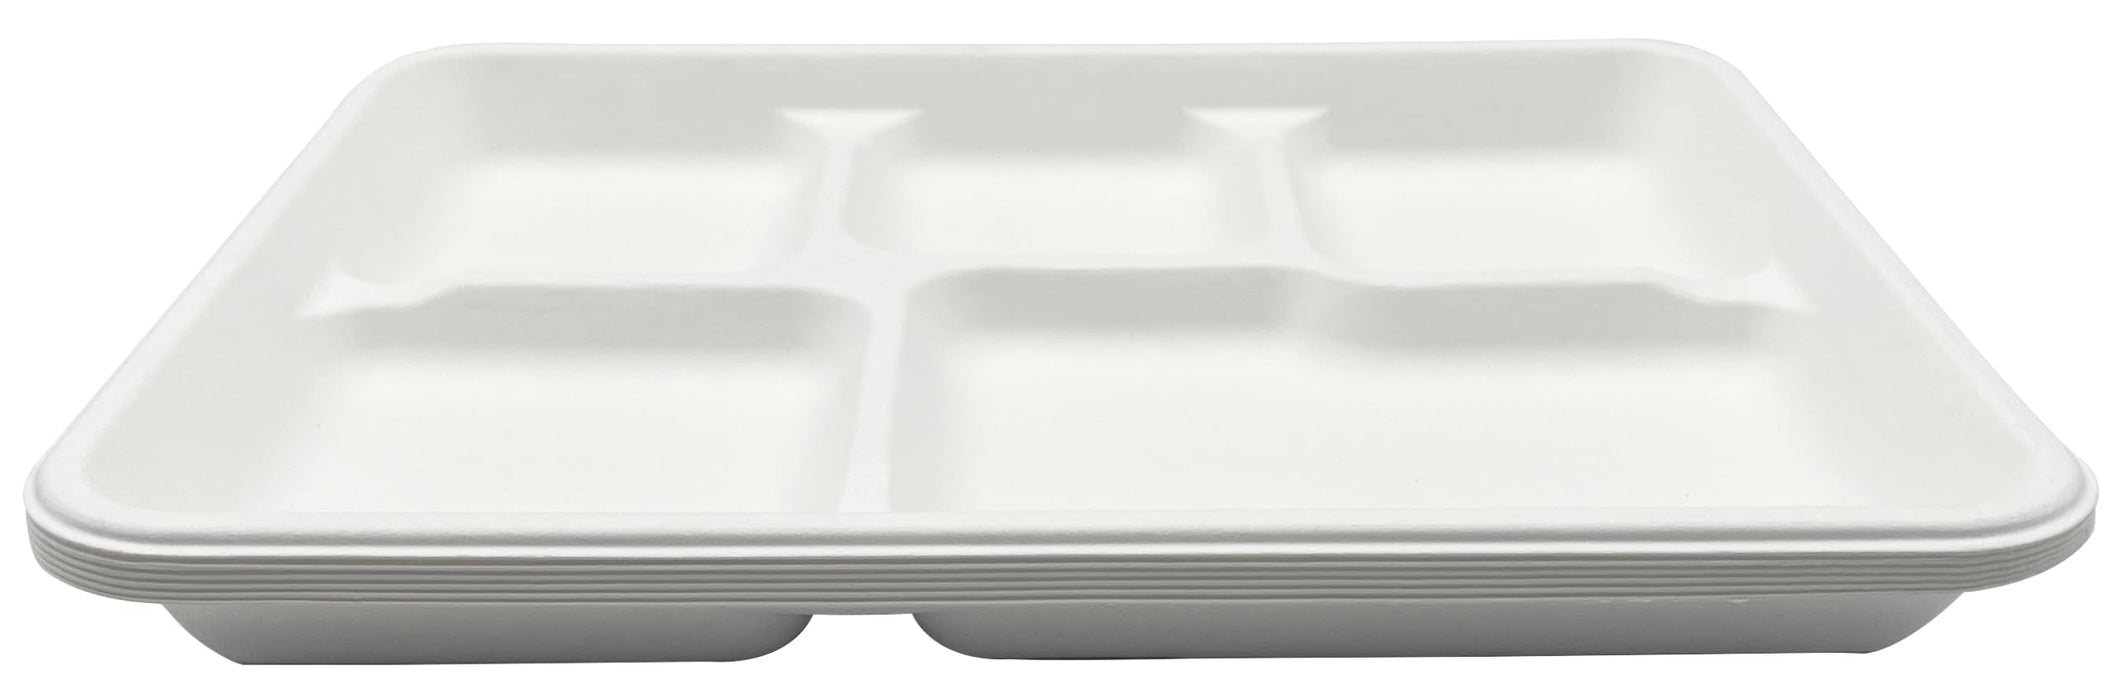 Rani 5 Compartment Square Biodegradable Divided Plates, Pack of 125 ~ Party, Thali, Buffet | Disposable & Eco-Friendly | Heavy-Duty Sturdy Paper Bagasse | Premium Quality | 10.24" x 8.27" x 0.91"